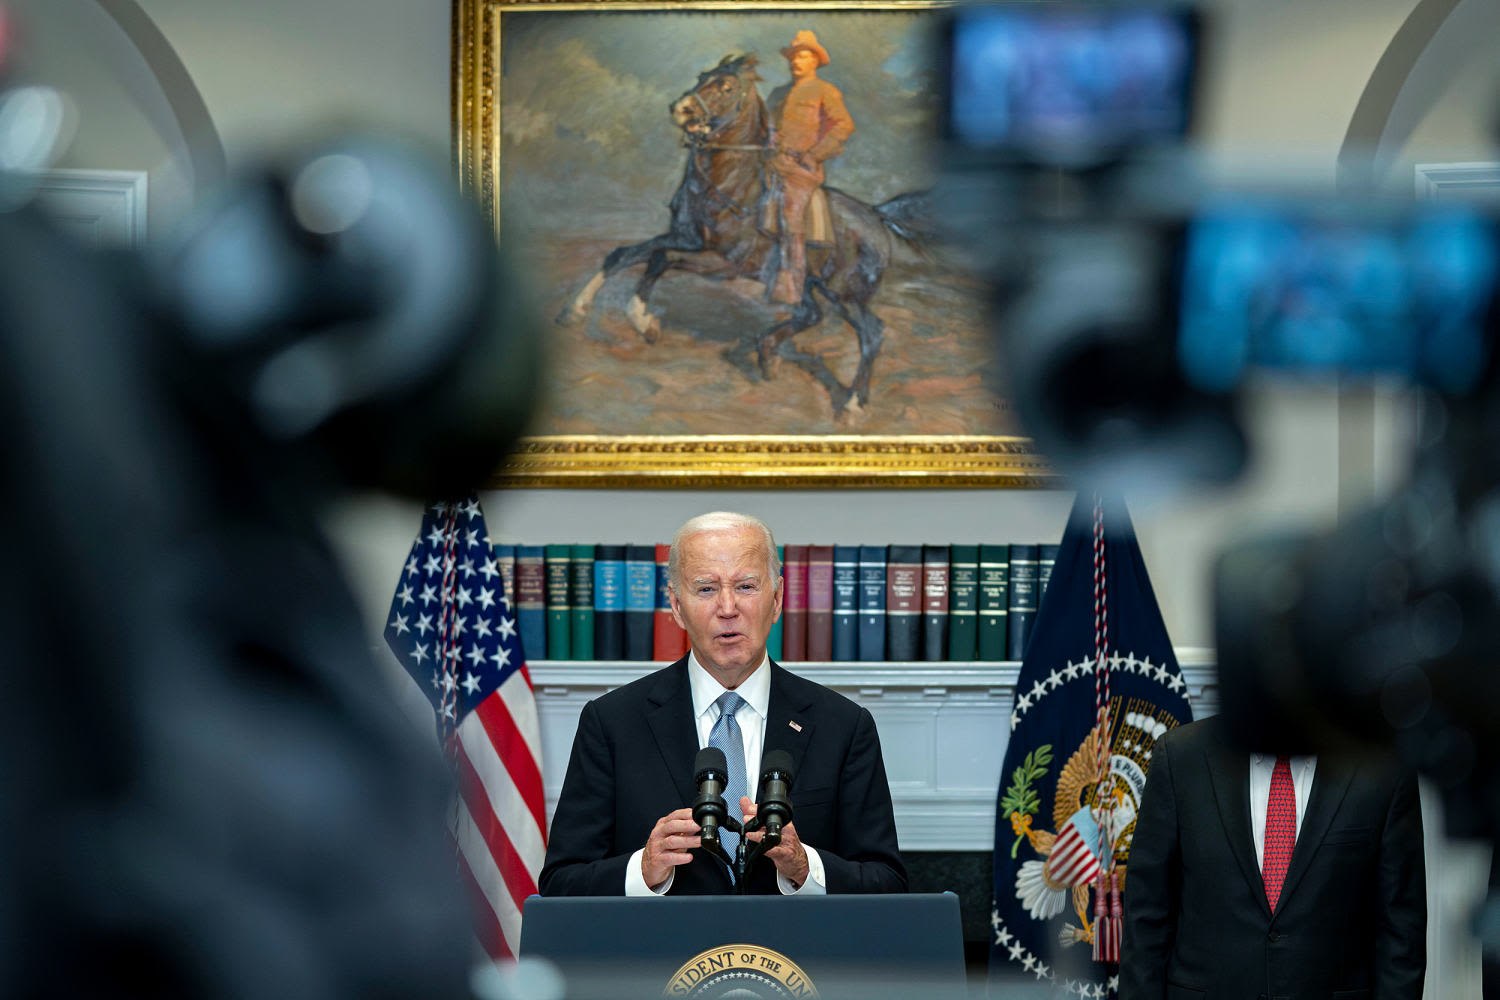 'A commander in chief moment': Inside Biden’s response to the Trump rally shooting